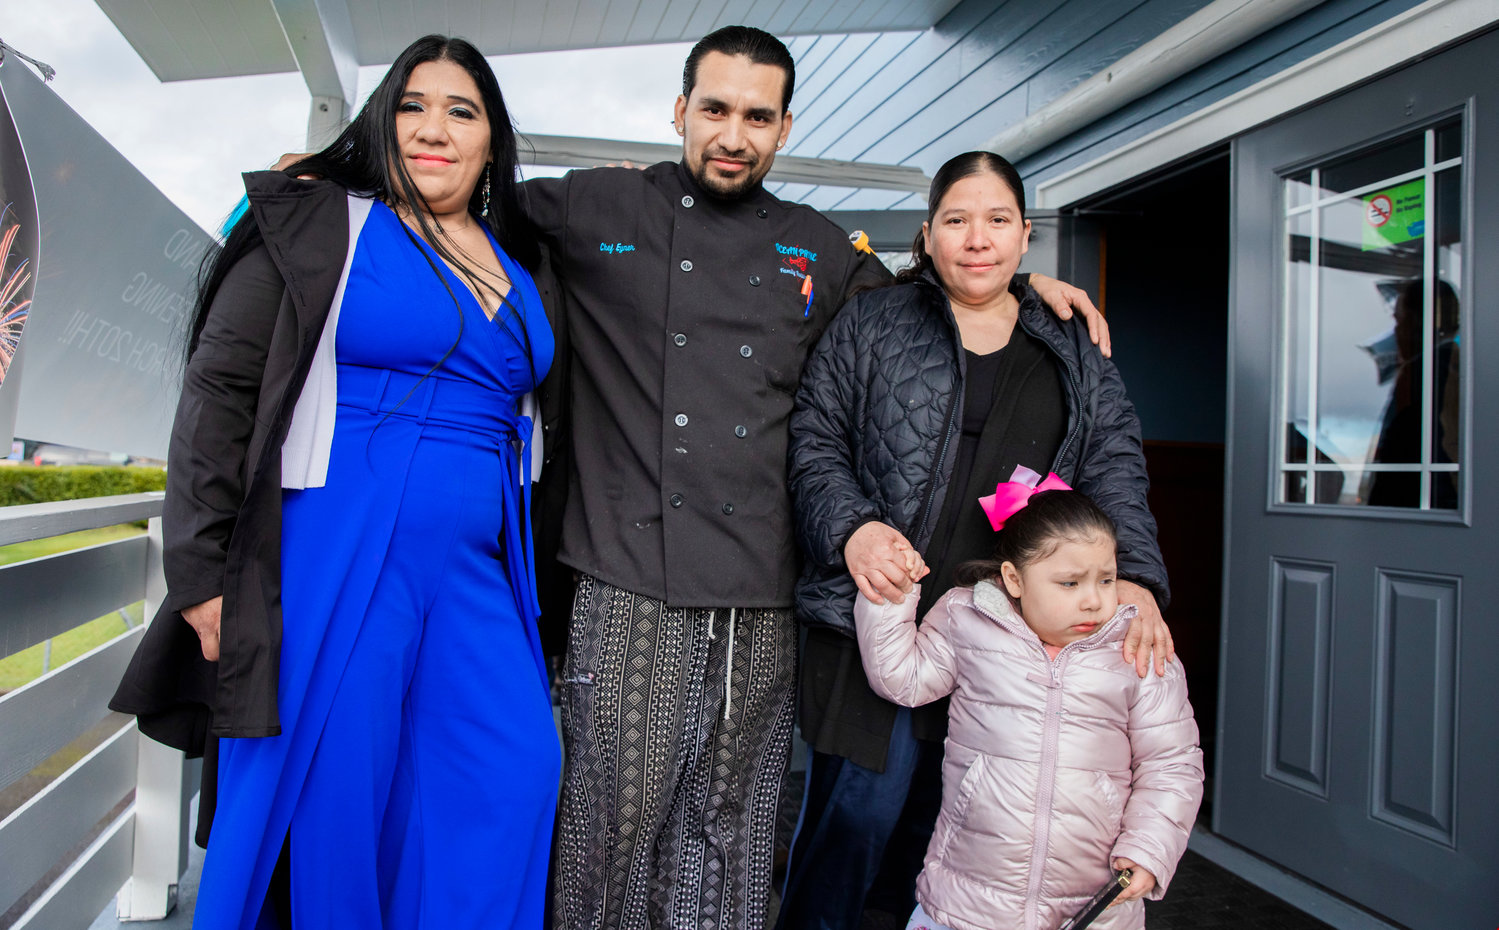 Chef Eyner "Rene" Cardona poses for a photo with attendees at a grand opening ceremony Monday morning outside Ocean Prime Family Restaurant in Chehalis.